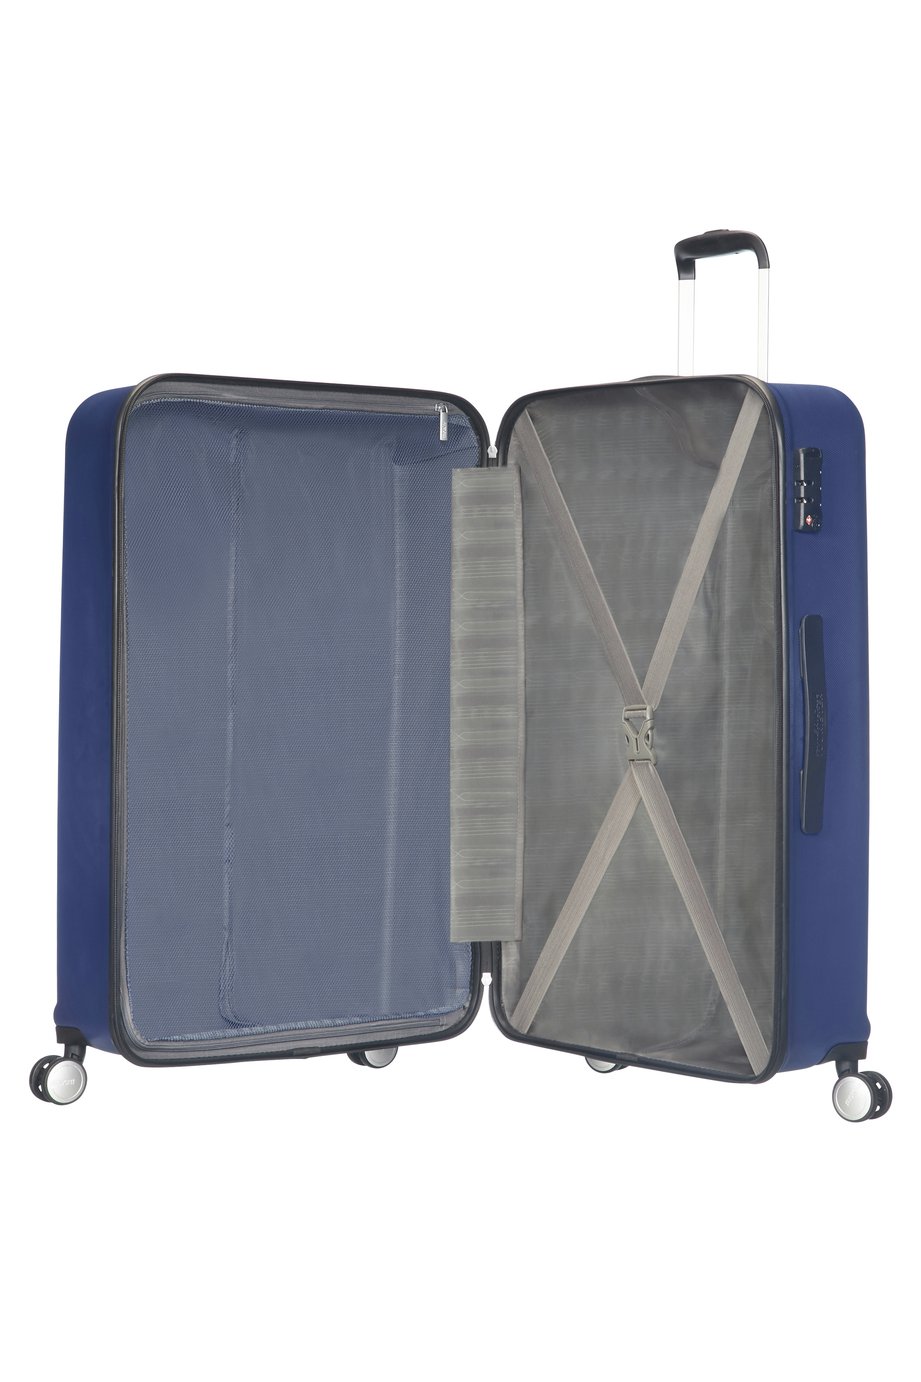 American Tourister Hypercube Hard Large Suitcase Review